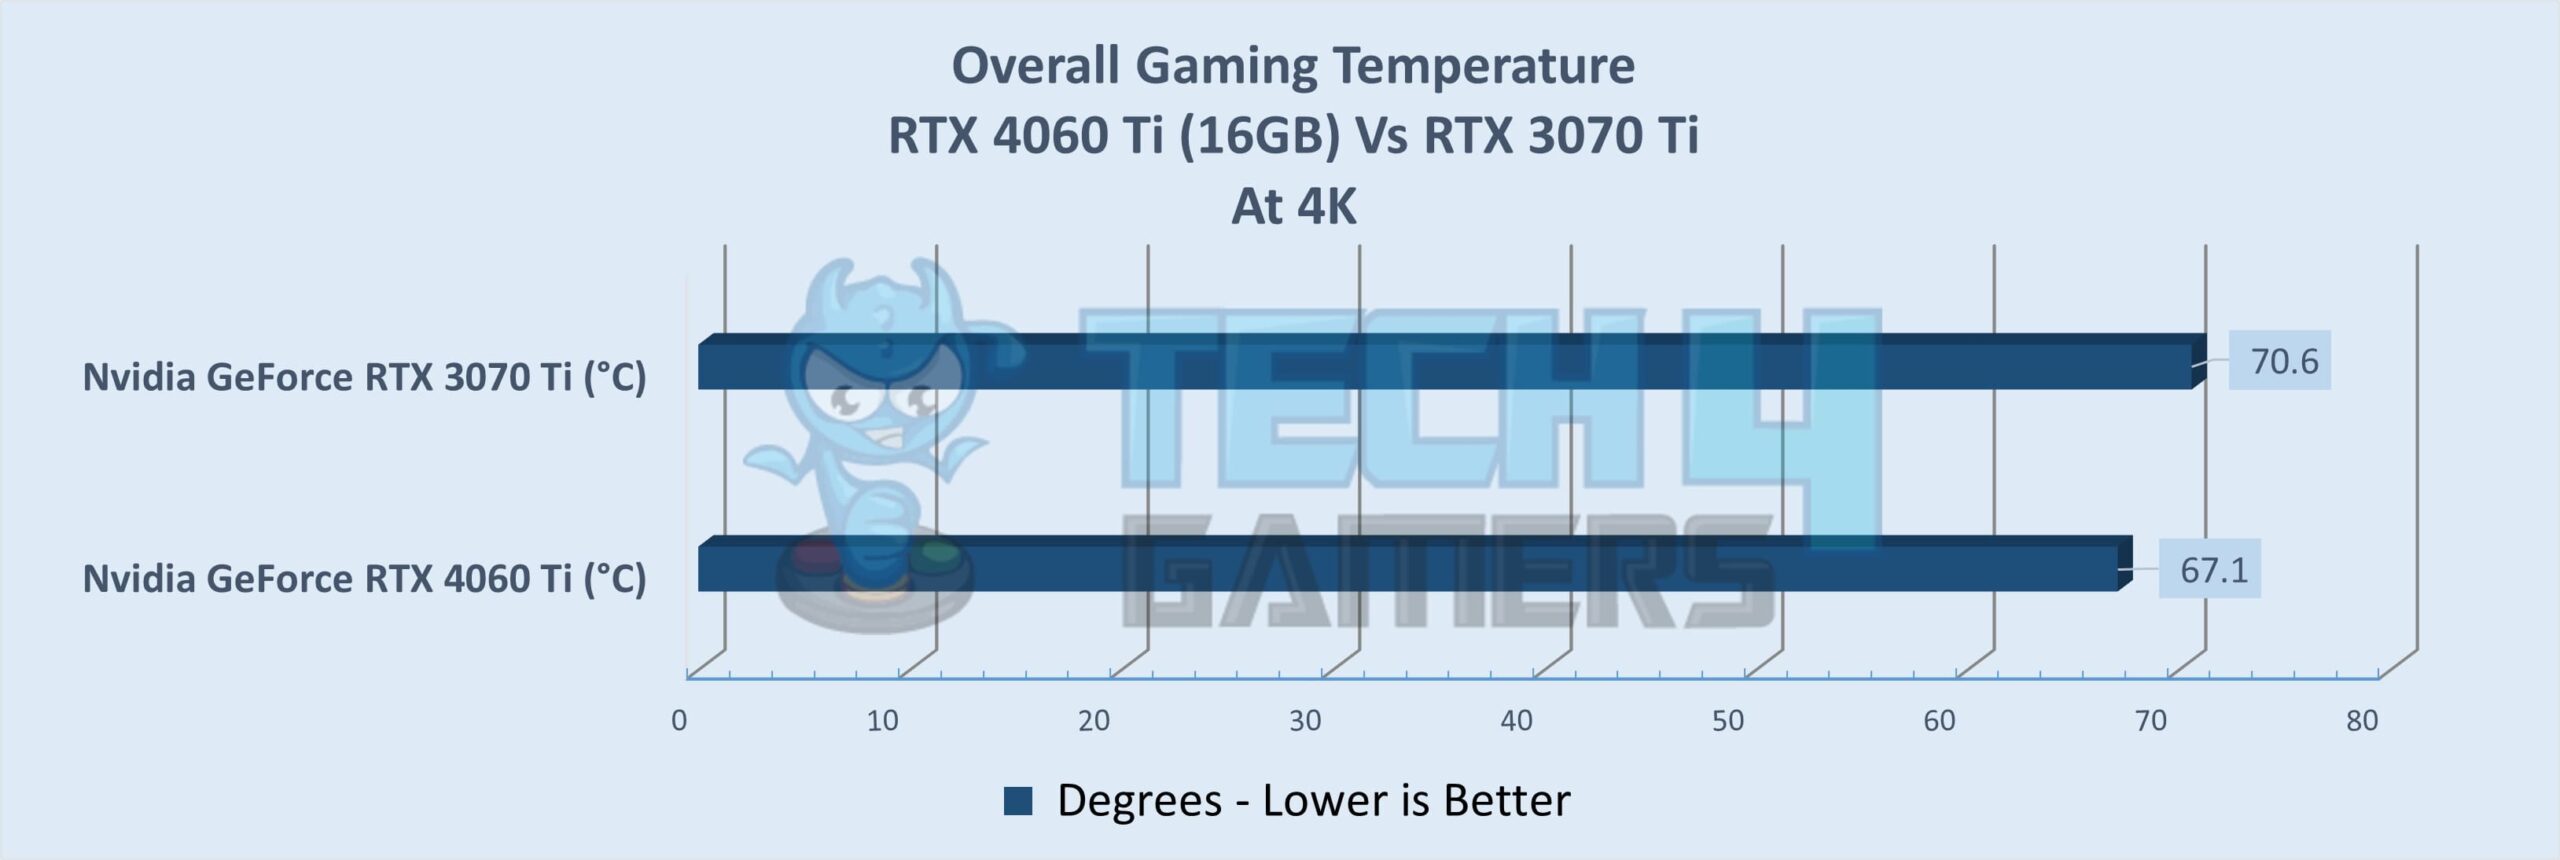 Thermal Performance Graph